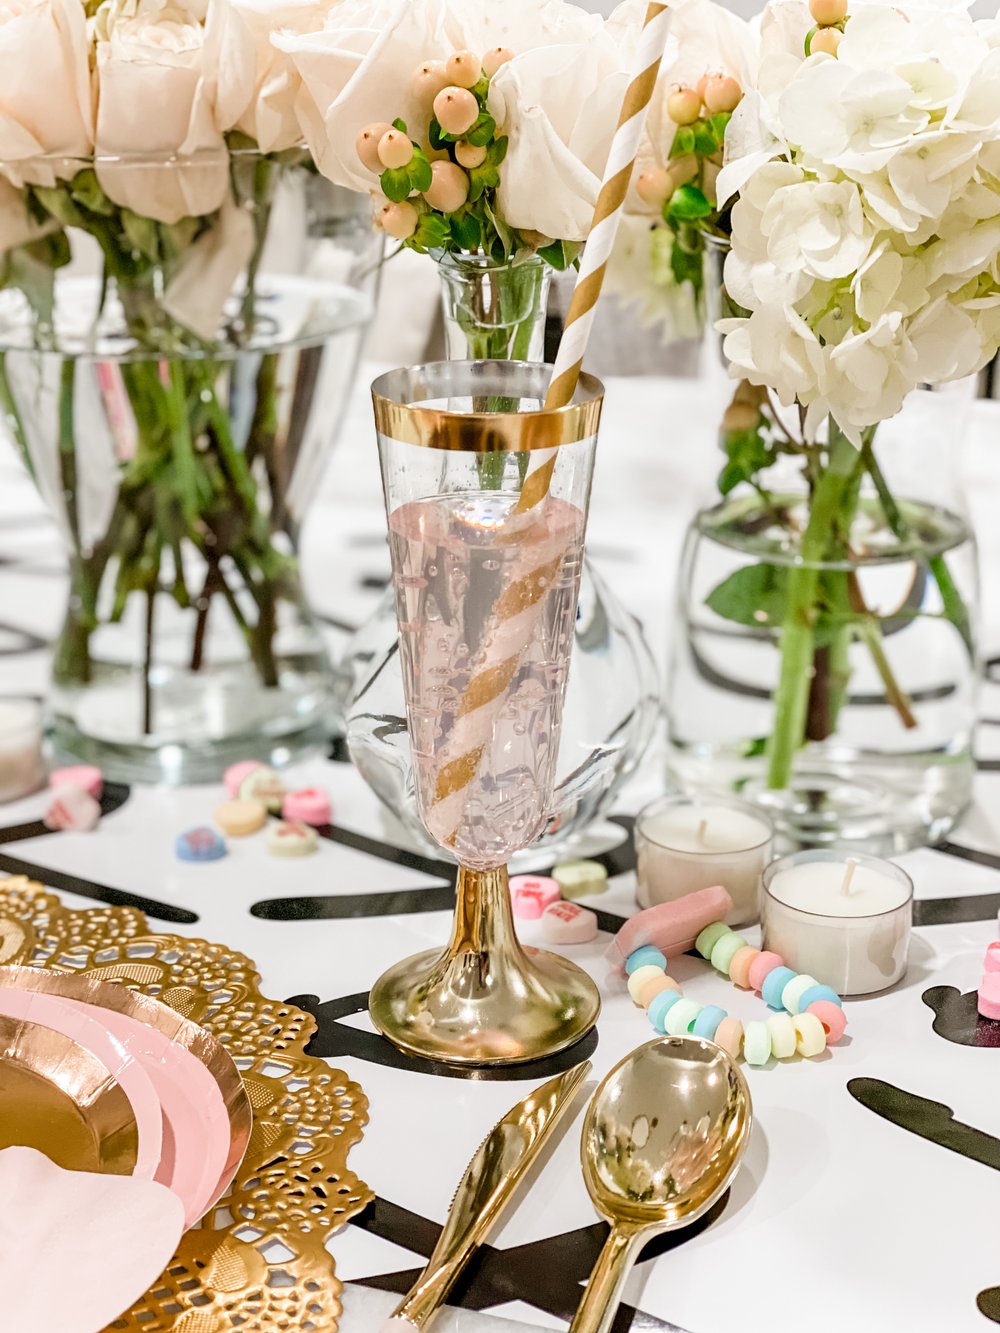 Here is a look at some of my favorite gold champagne flutes